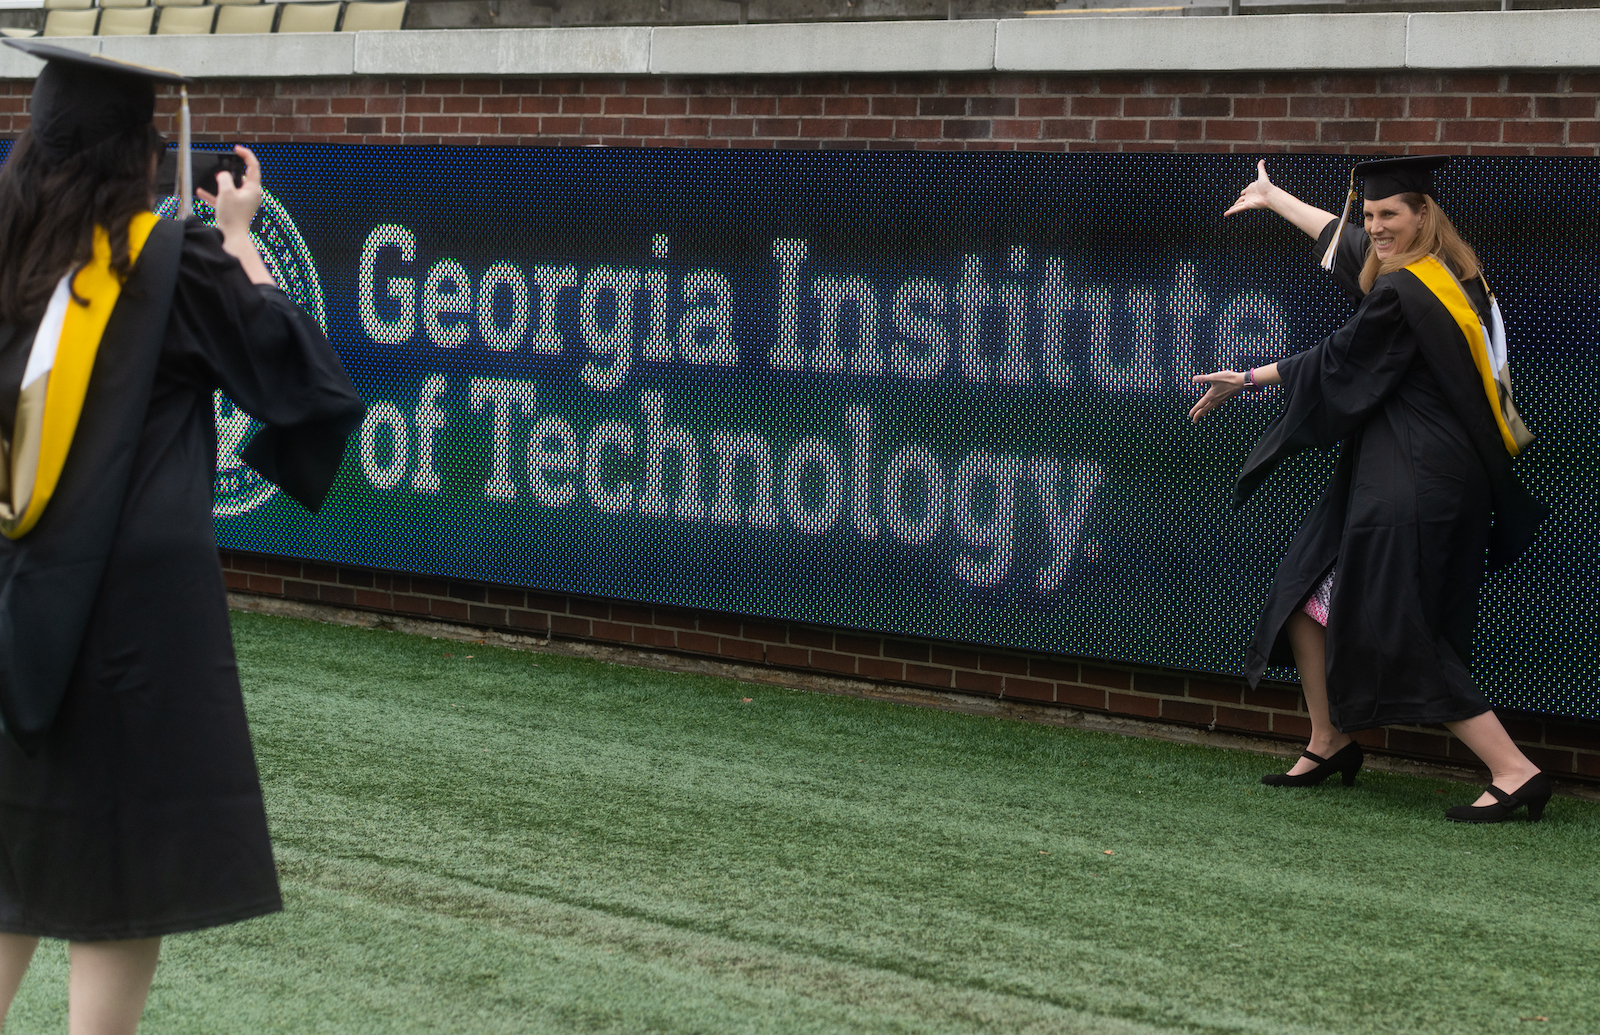 master's student next to the Georgia Tech sign inside the stadium